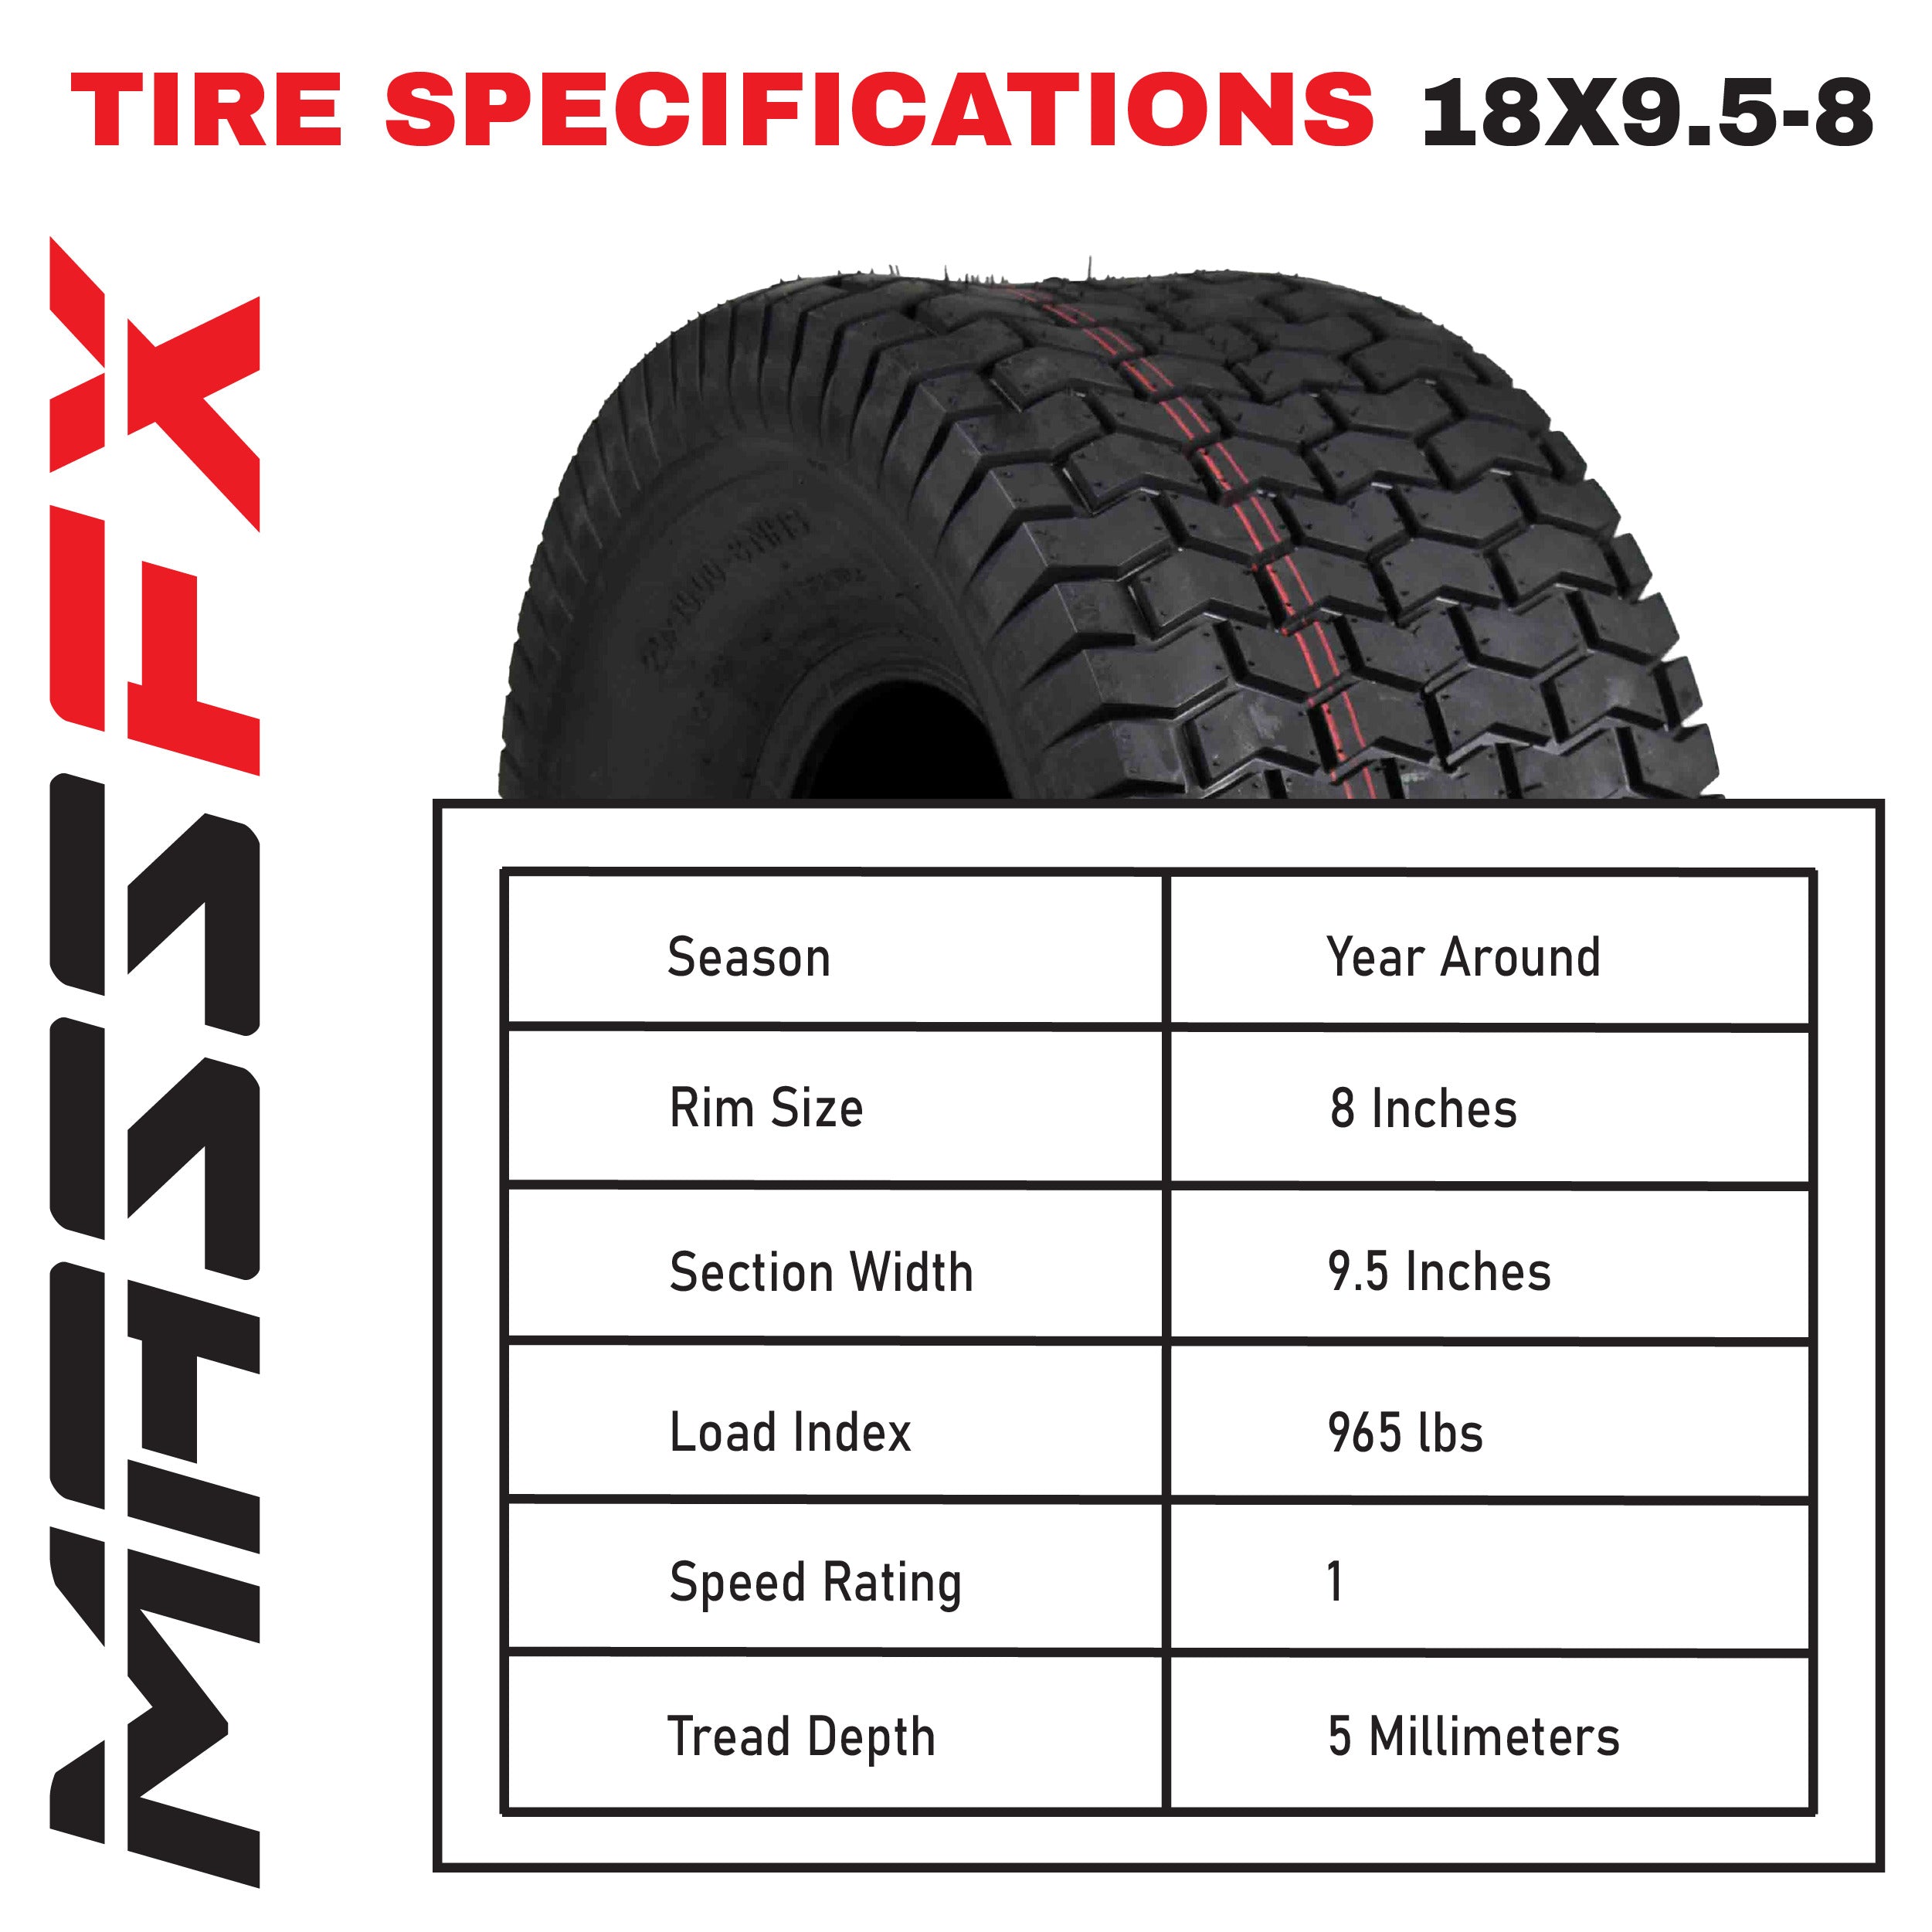 MASSFX 18x9.50-8 Lawn Mower Tires 4ply 2-Pack